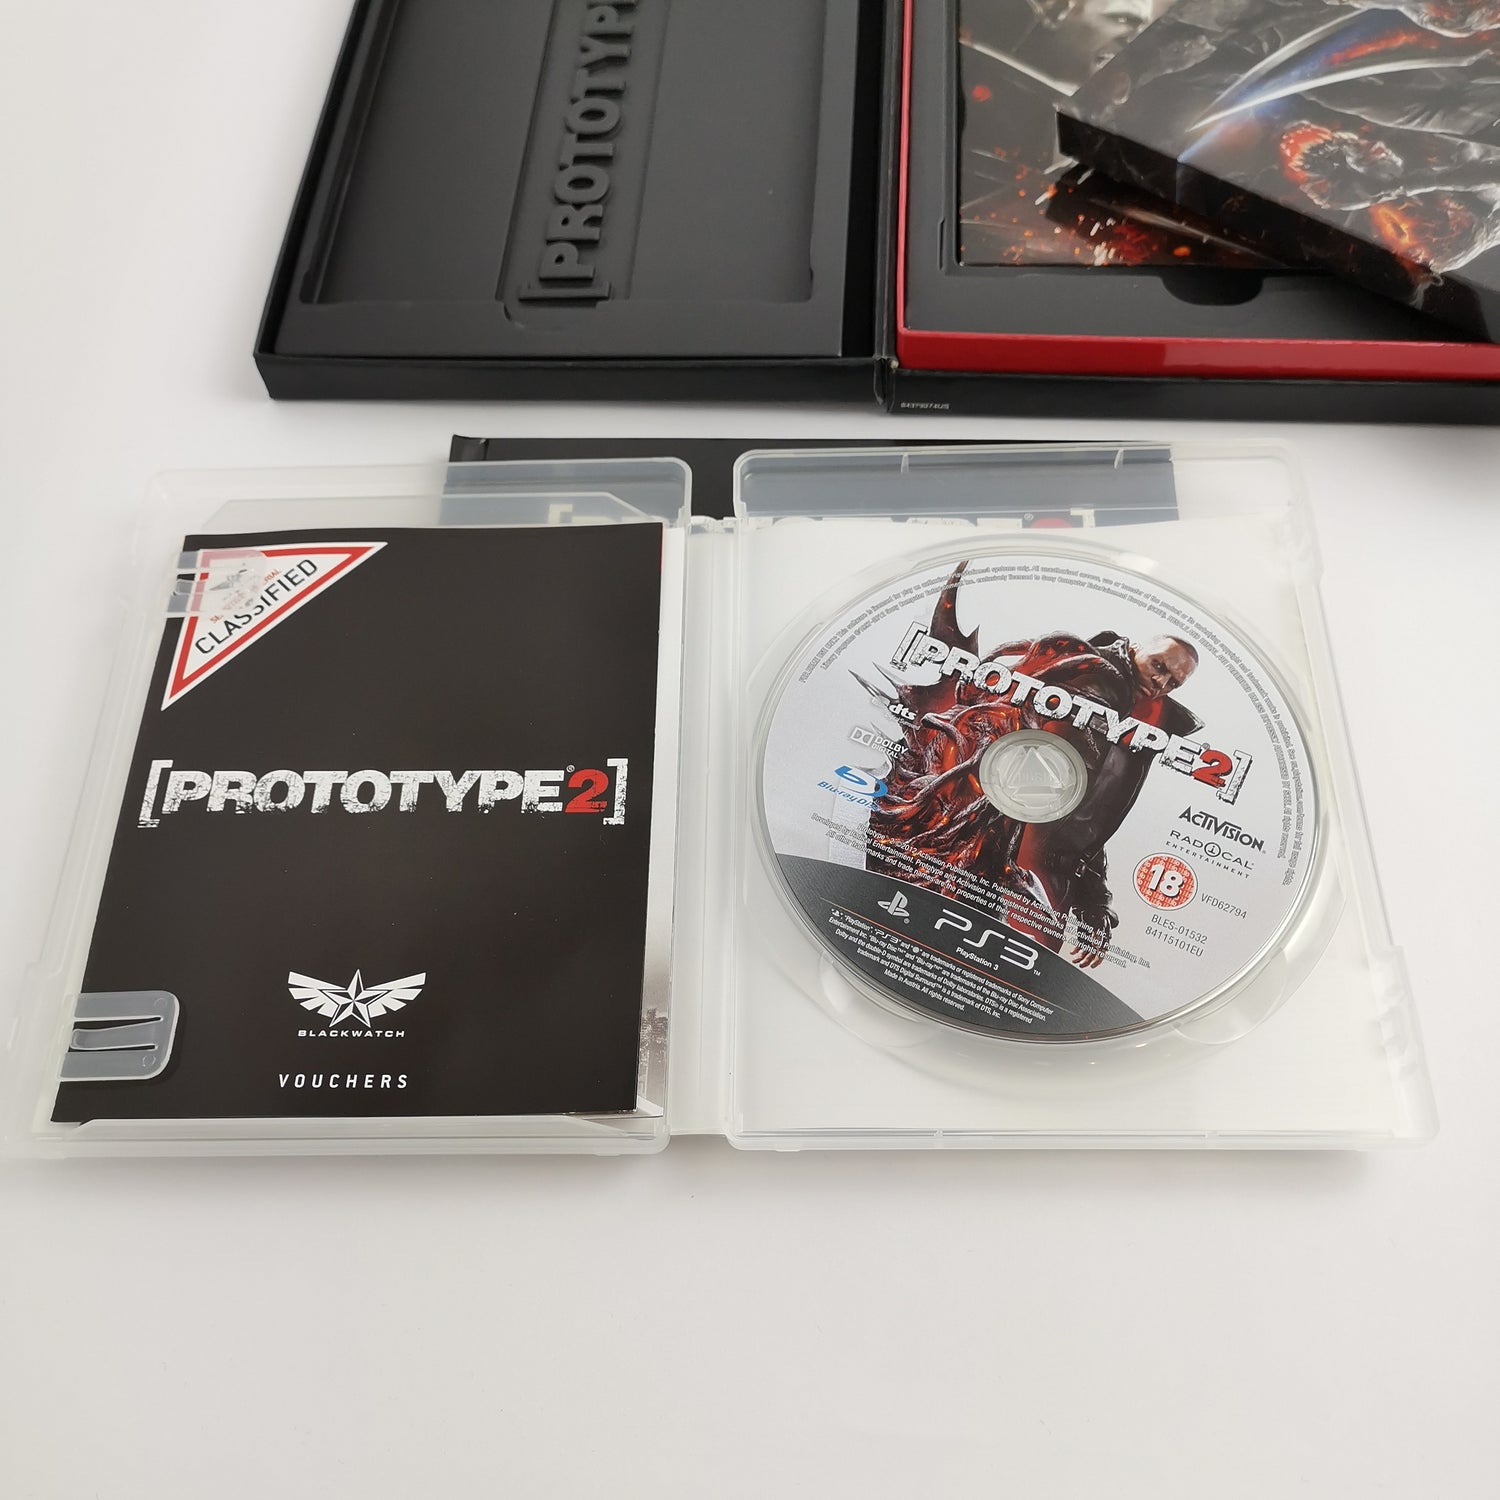 Sony Playstation 3 Game: Prototype 2 Blackwatch Collectors Edition | PS3 USK18